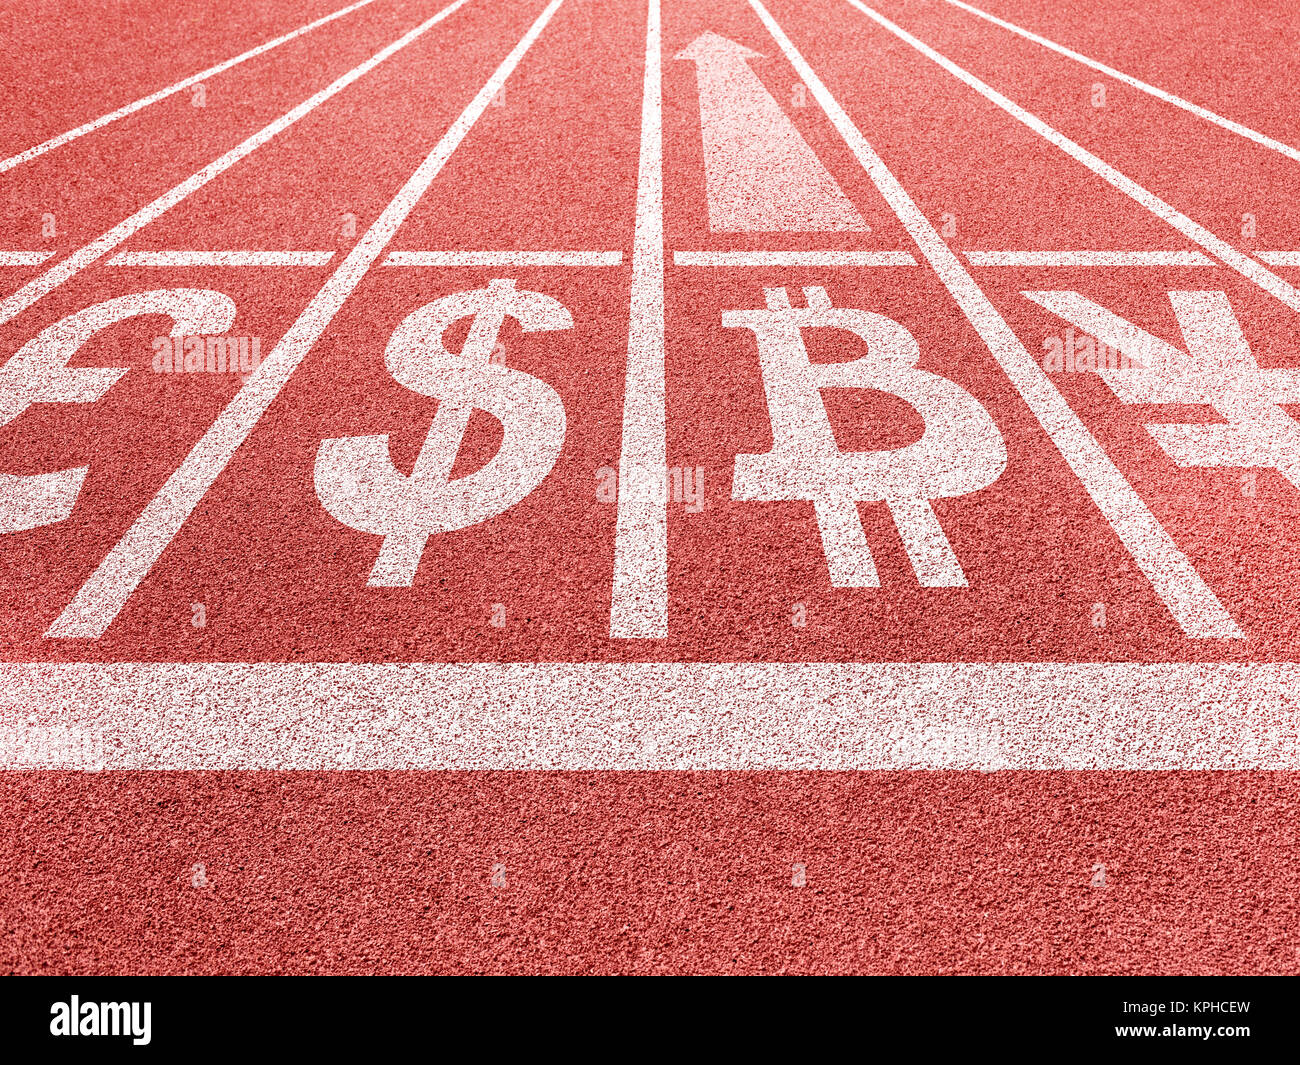 Bitcoin growing concept. Currencies symbols on running trace start. Stock Photo